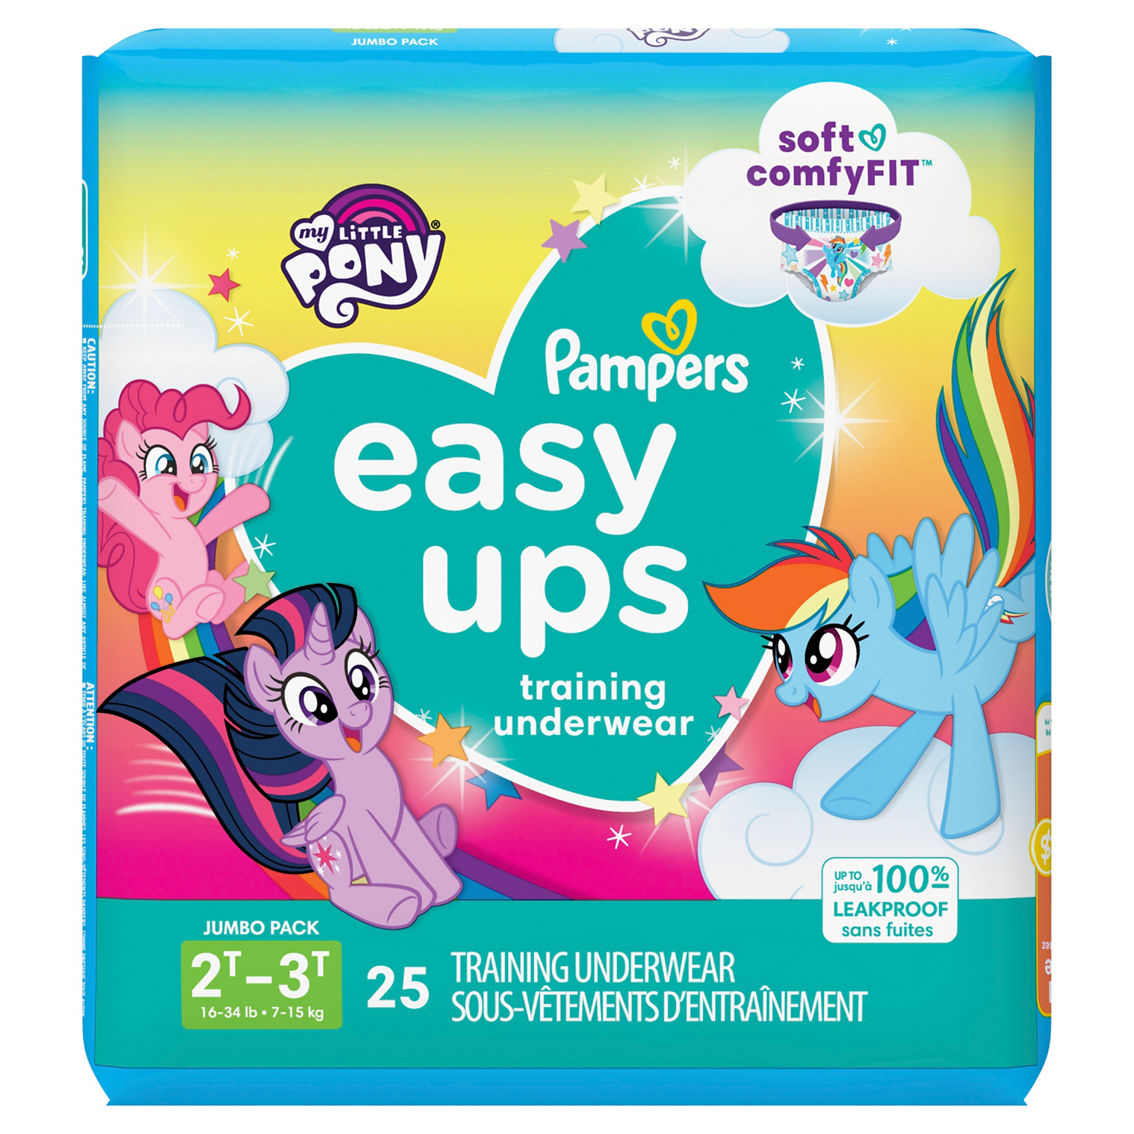 Pampers Girls Easy Ups Training Underwear Size 2t-3t (16-34 Lb